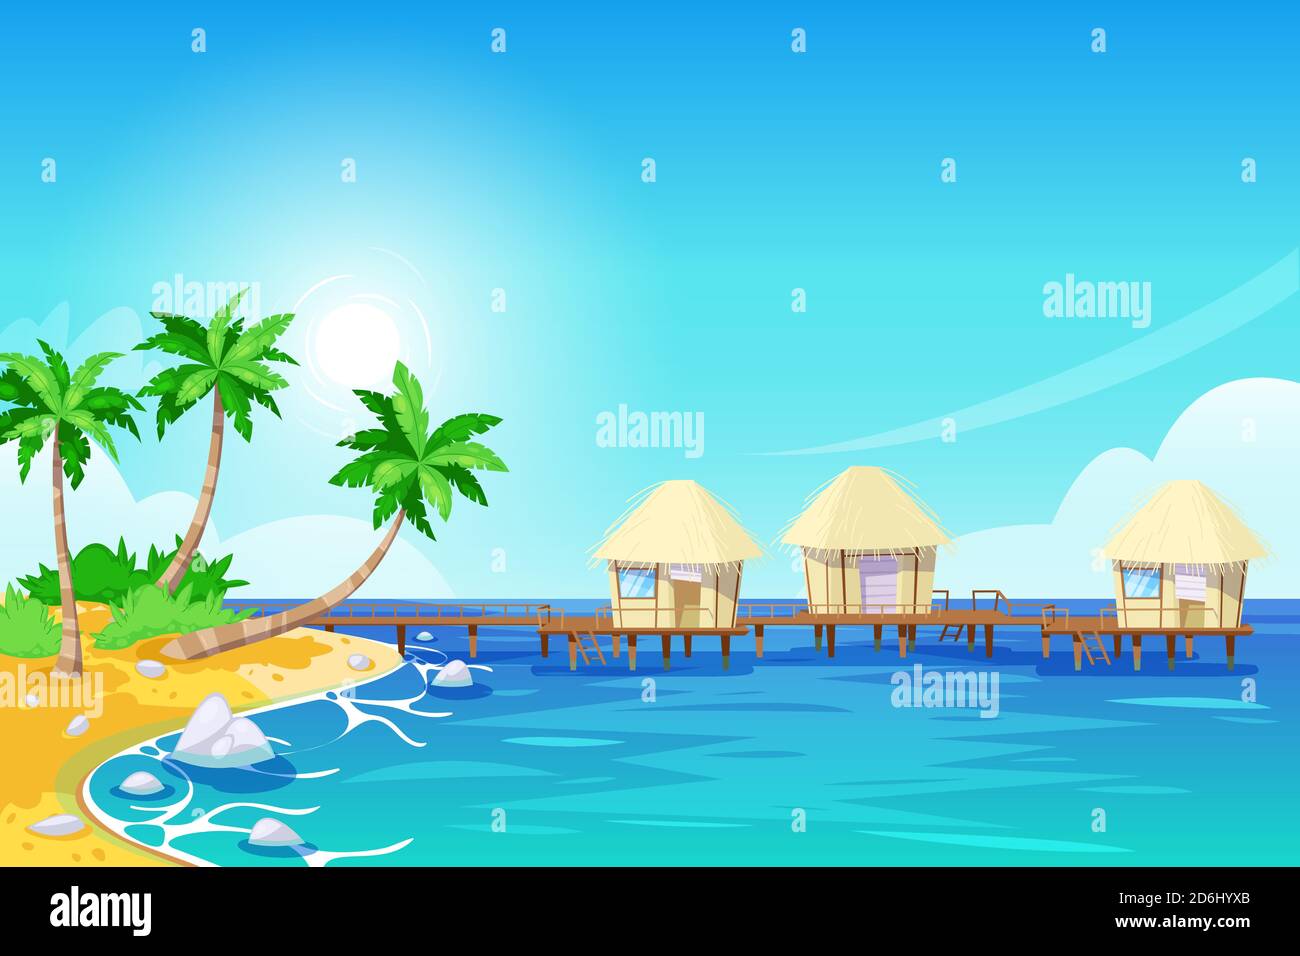 Tropical island landscape, vector illustration. Palms, beach and bungalows in the ocean. Summer travel cartoon background. Stock Vector